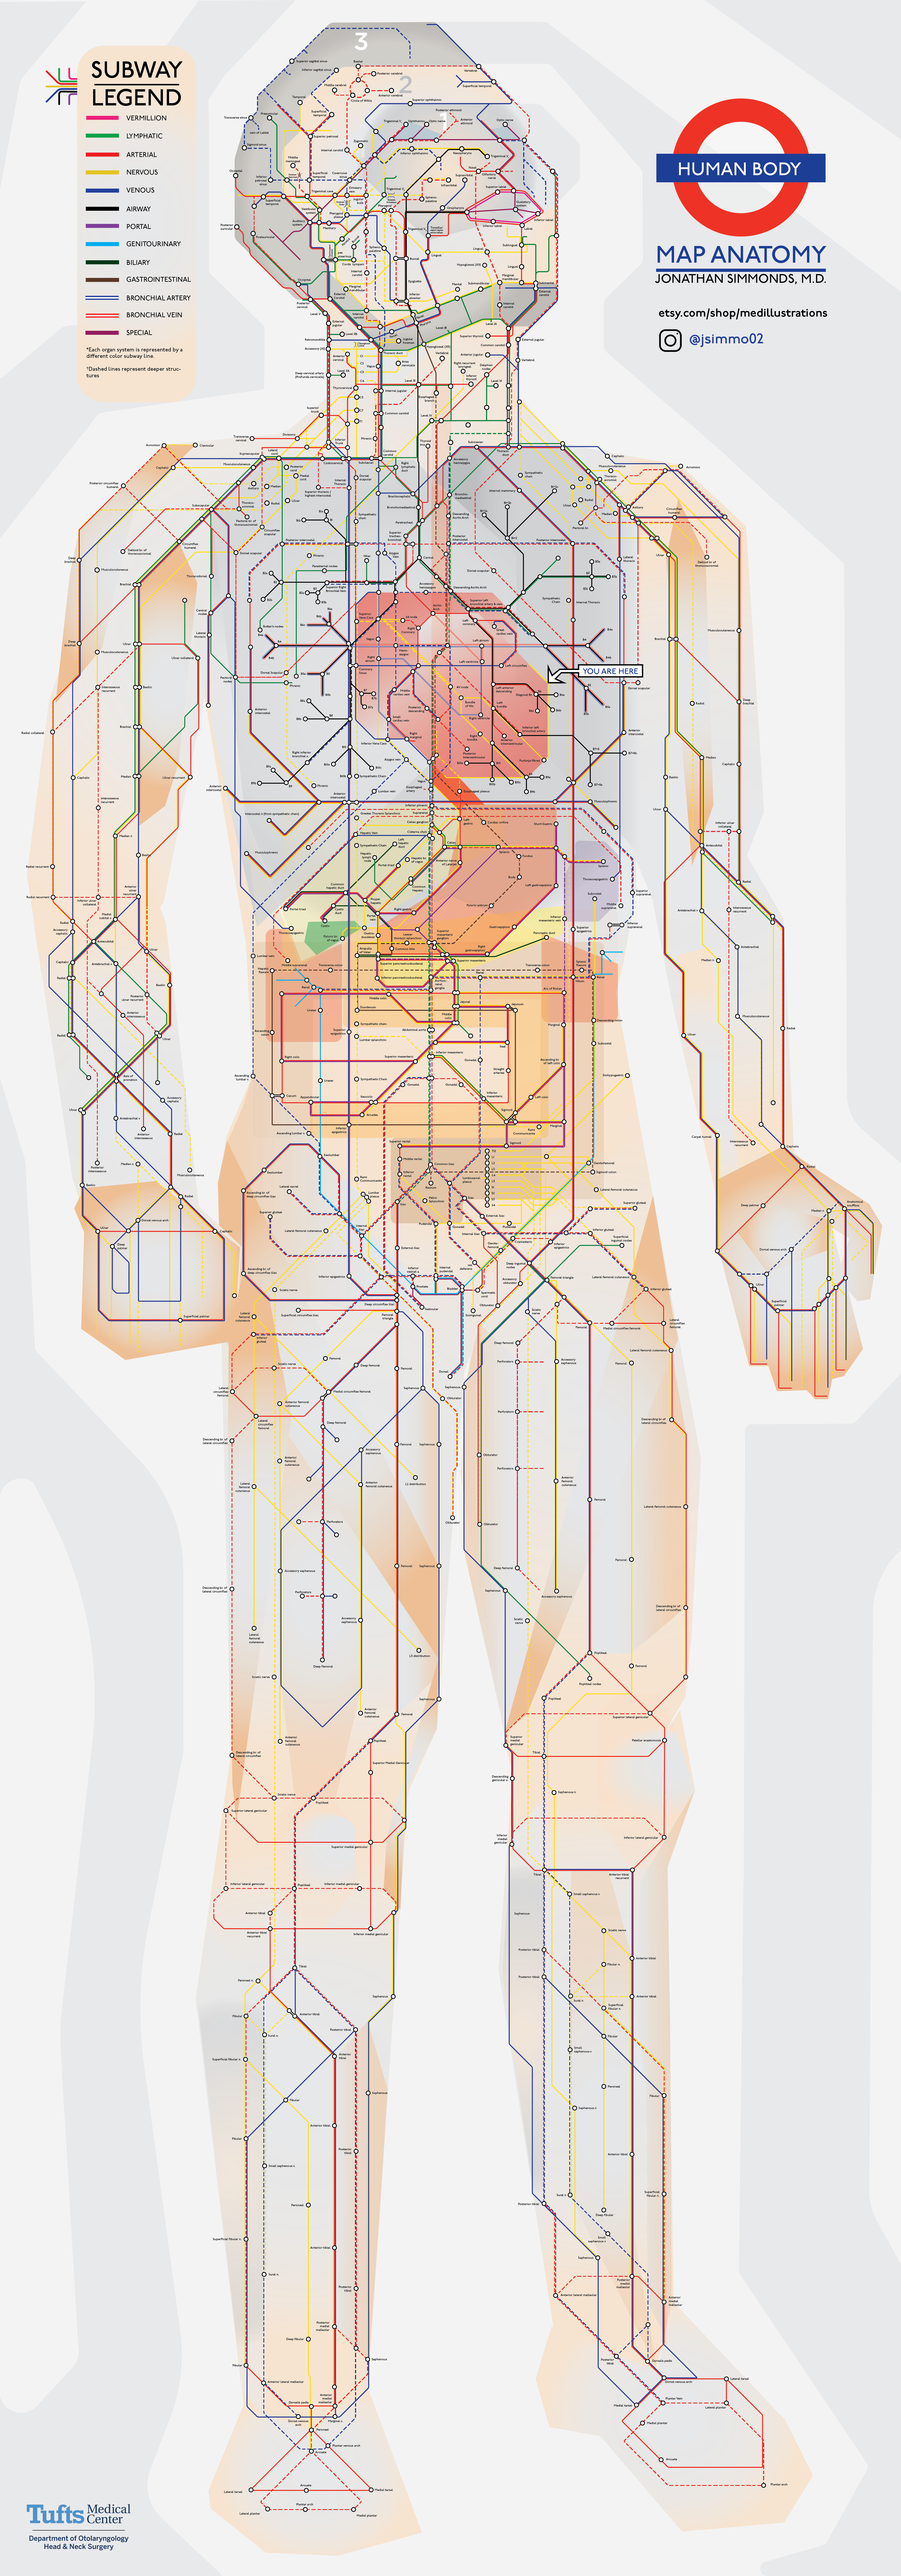 Human Anatomy Diagram A Doctor Created A Human Anatomy Diagram In The Style Of A Subway